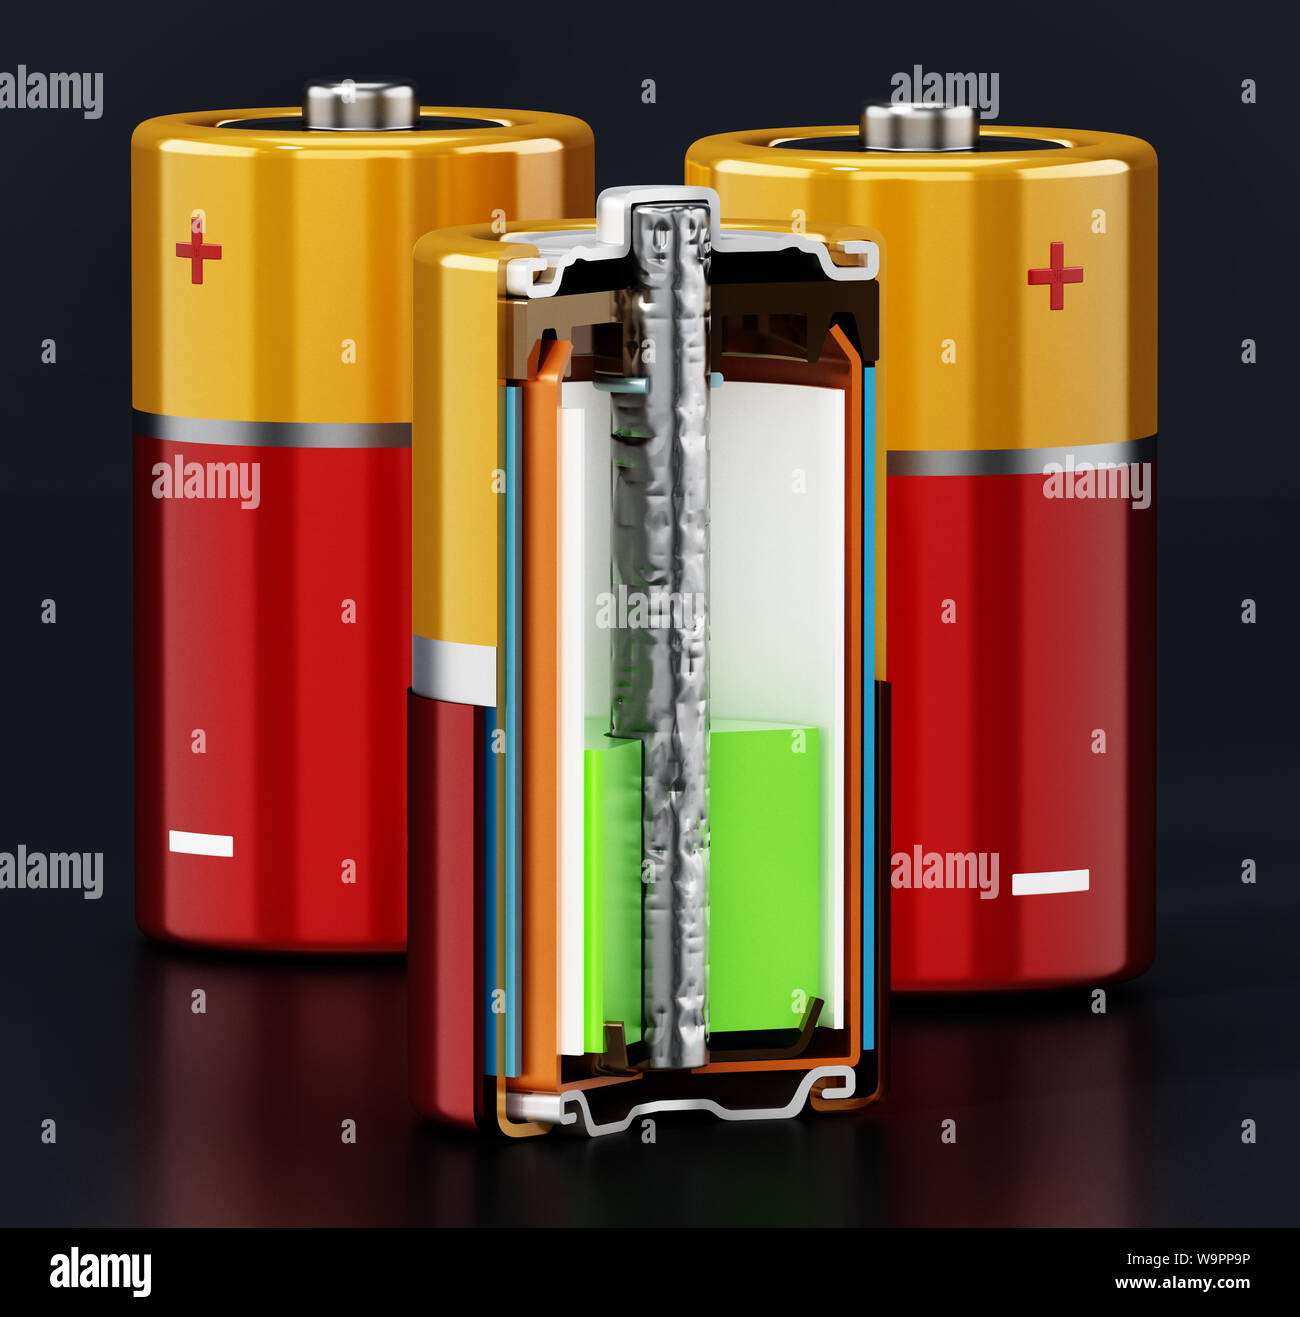 Image showing cross-section of an alcaline battery. 3D illustration. Stock Photo